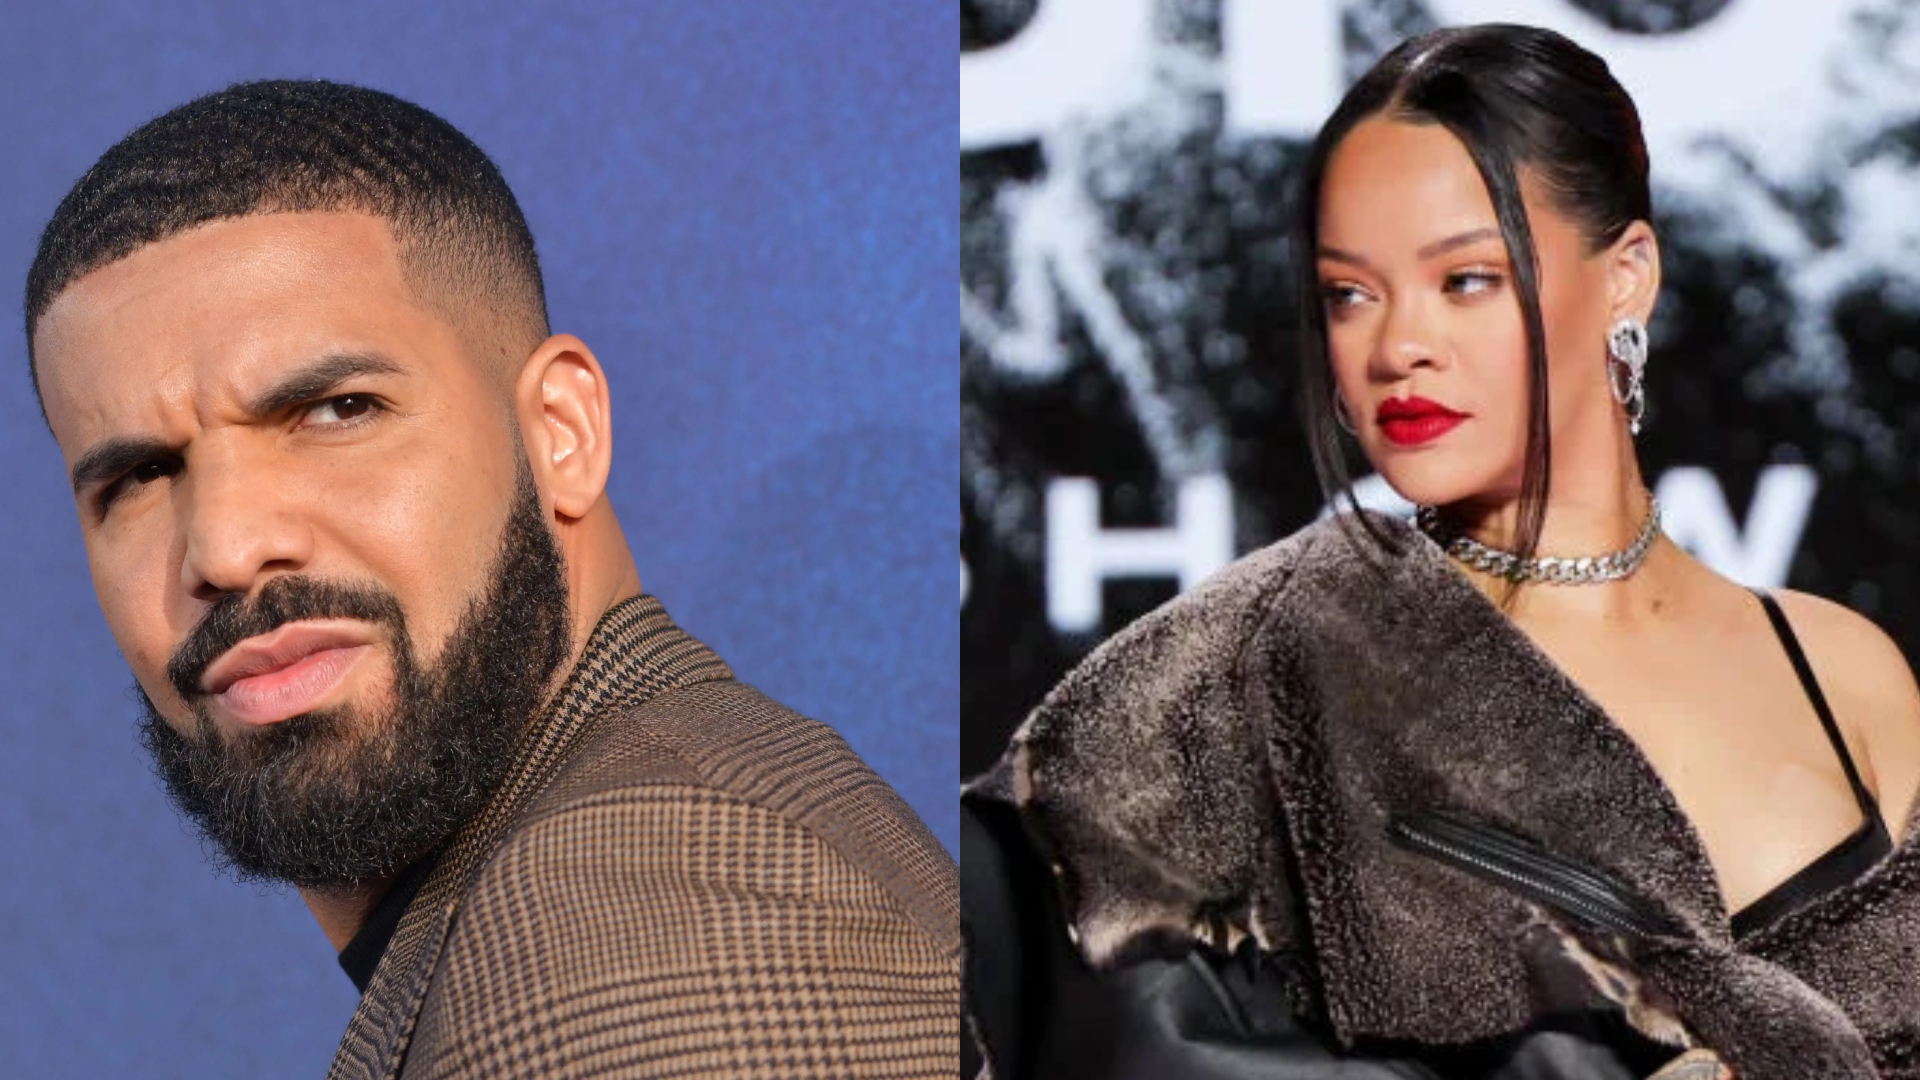 Rihanna, who on-and-off dated Drake from 2009-2016, welcomed her second baby with A$AP Rocky on 1st August.